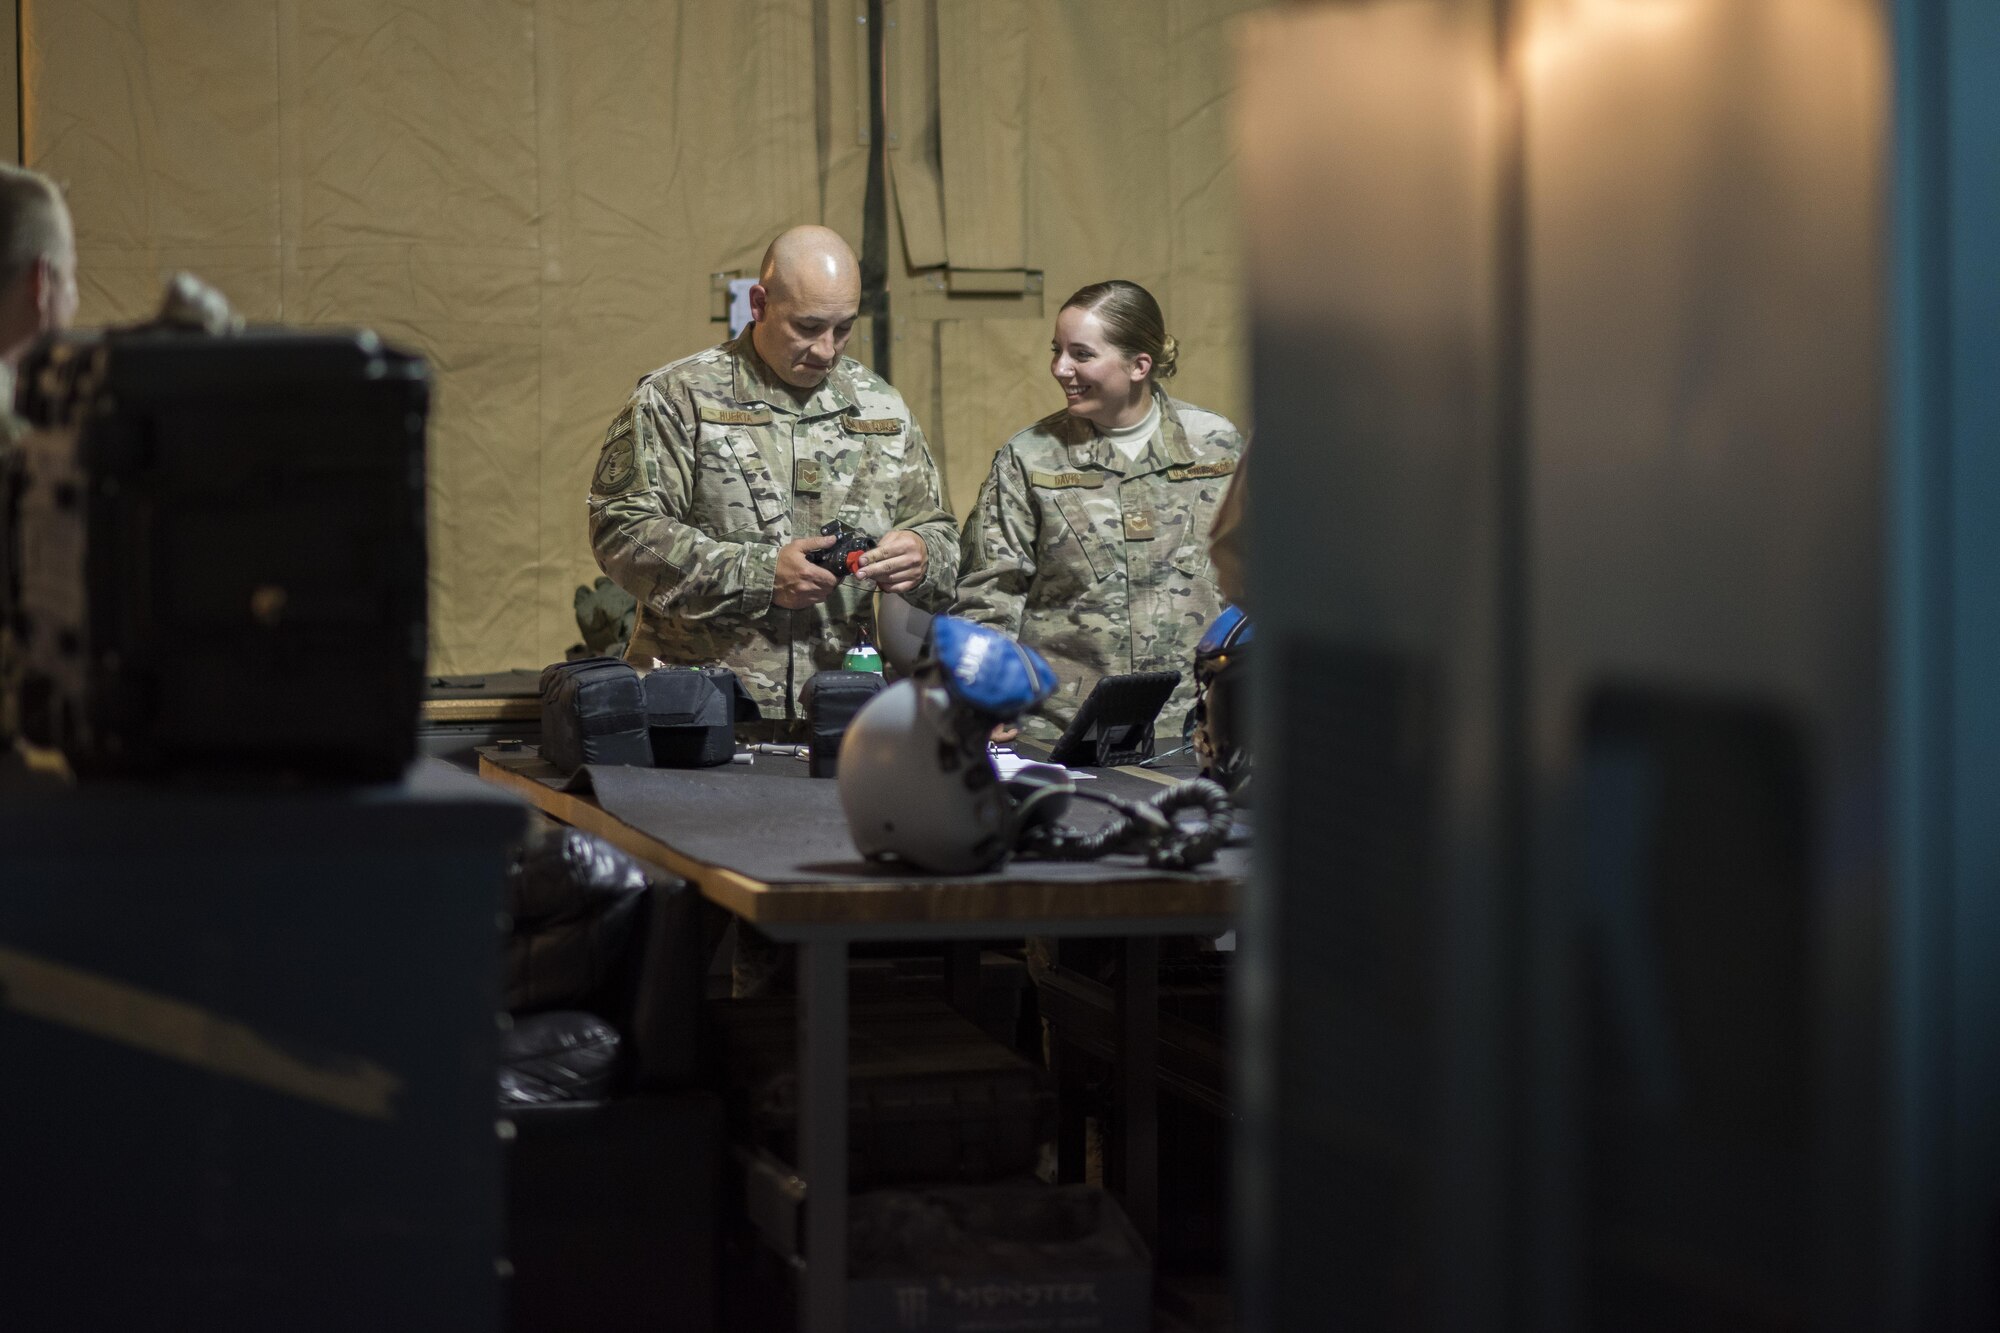 Tech. Sgt. Todd Huerta, 332nd Aircrew Flight Equipment non-commissioned officer in charge, finishes inspecting a pair of night vision goggles June 12, 2017, in Southwest Asia. After every mission, pilots return their equipment to the AFE shop where it is inspected, maintained and stored until their next flight. (U.S. Air Force photo/Senior Airman Damon Kasberg)